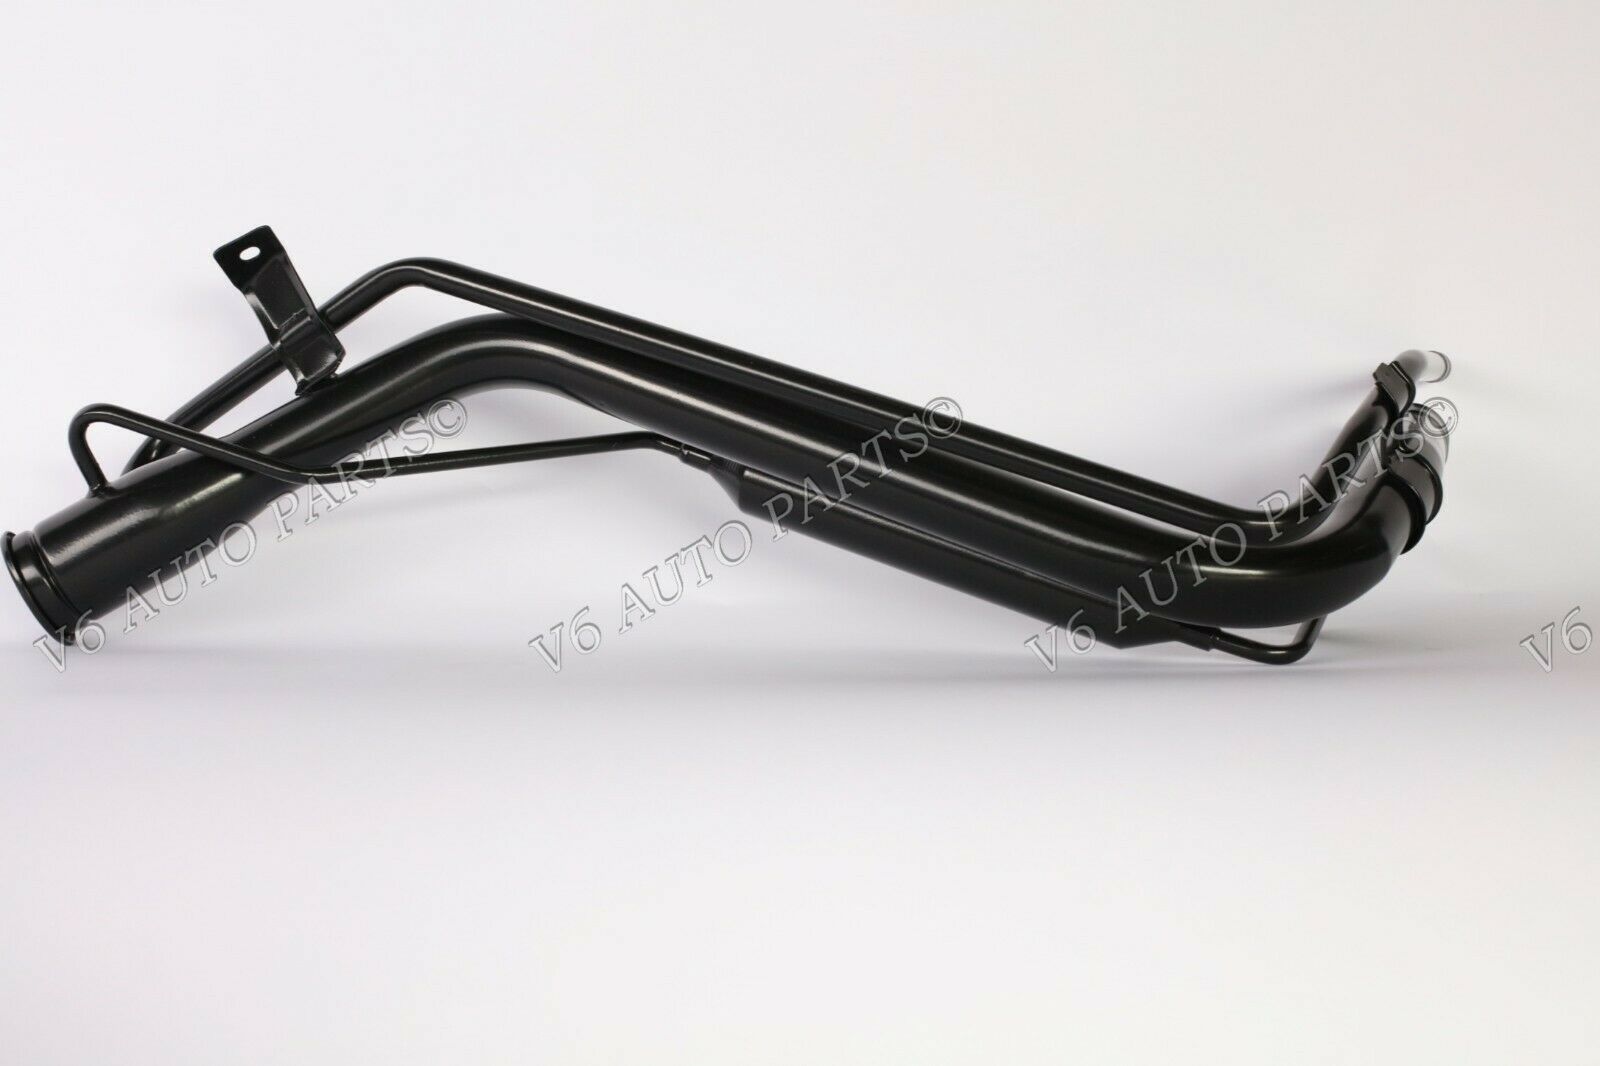 17660SAAG02 Fuel Tank Filler Neck Pipe For 2002 TO 2008 HONDA City PETROL